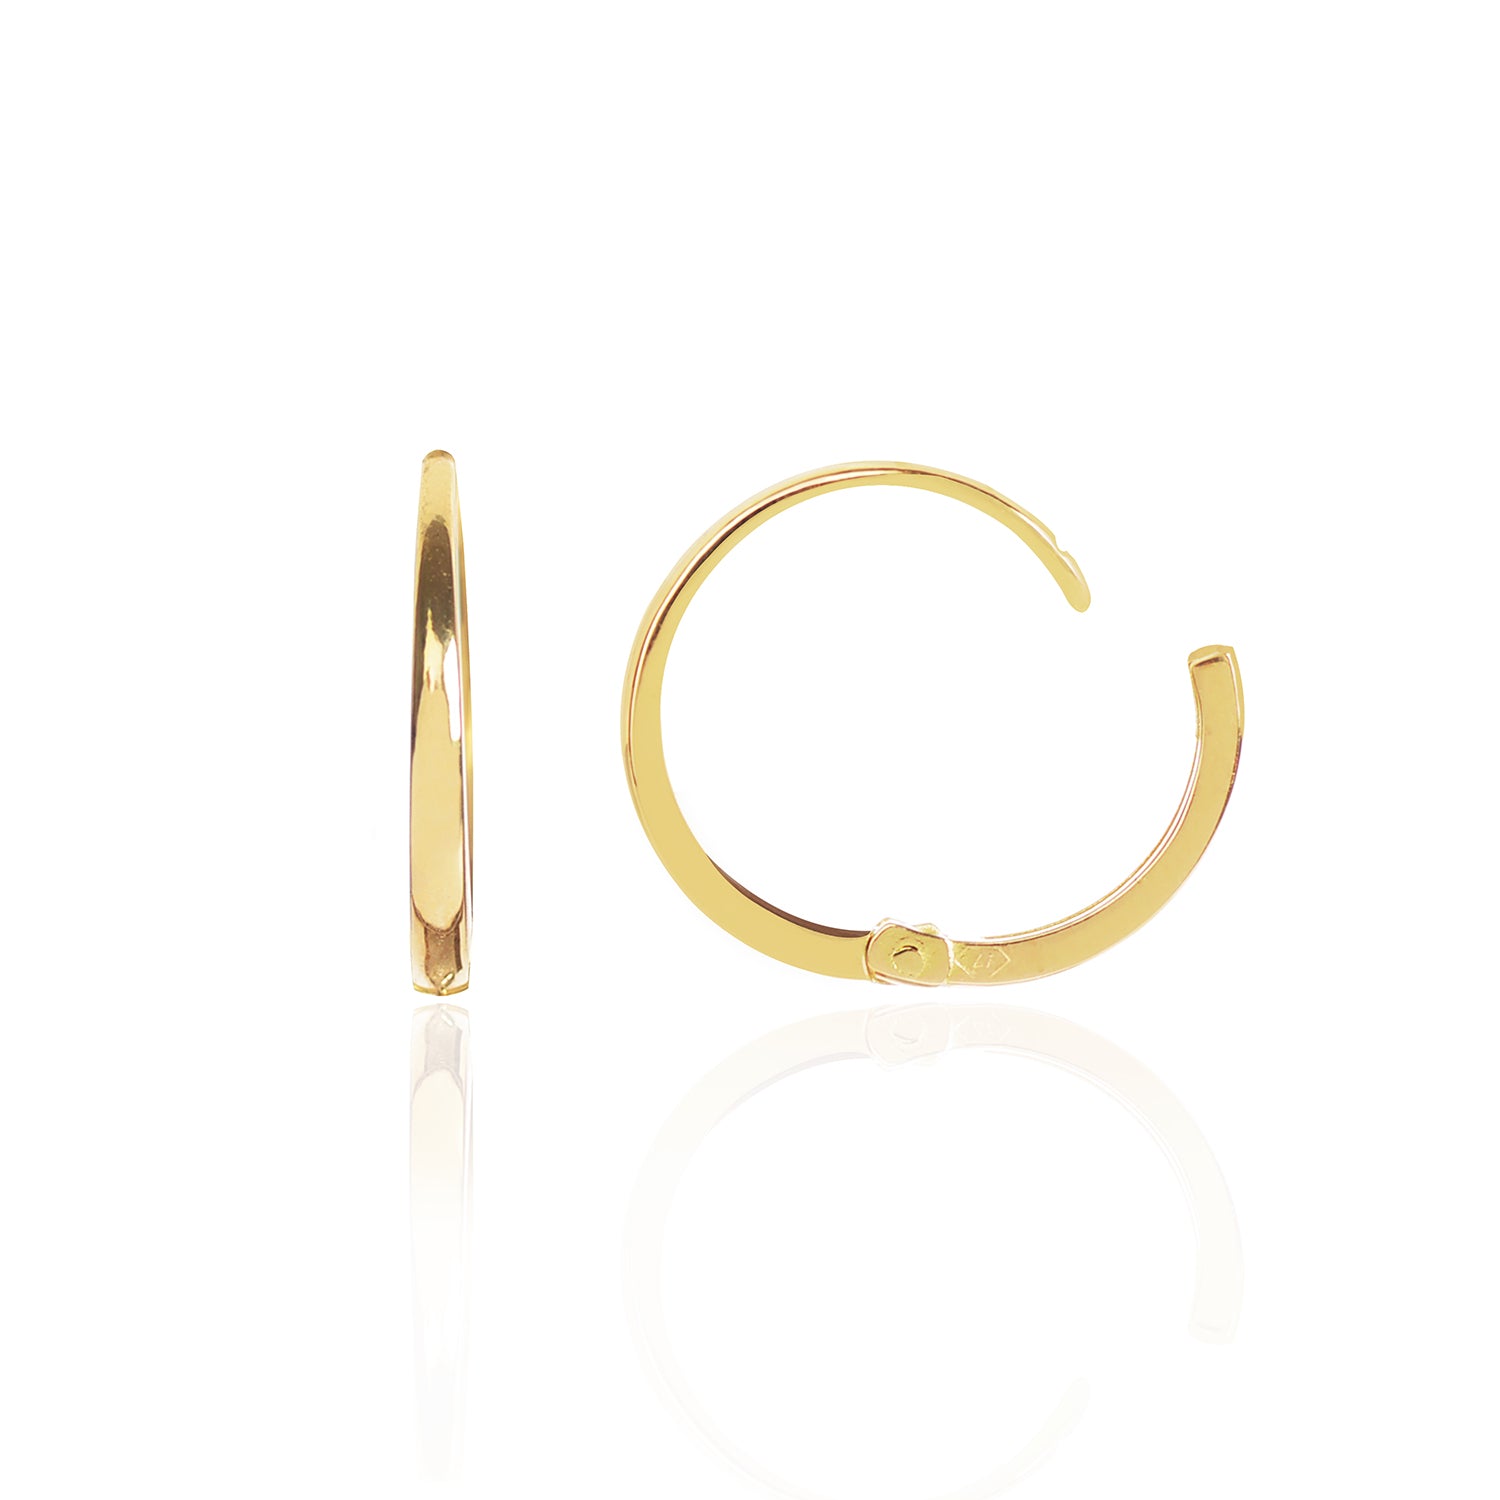 18ct yellow Gold Closed Hoops Side View by McFarlane Fine Jewellery